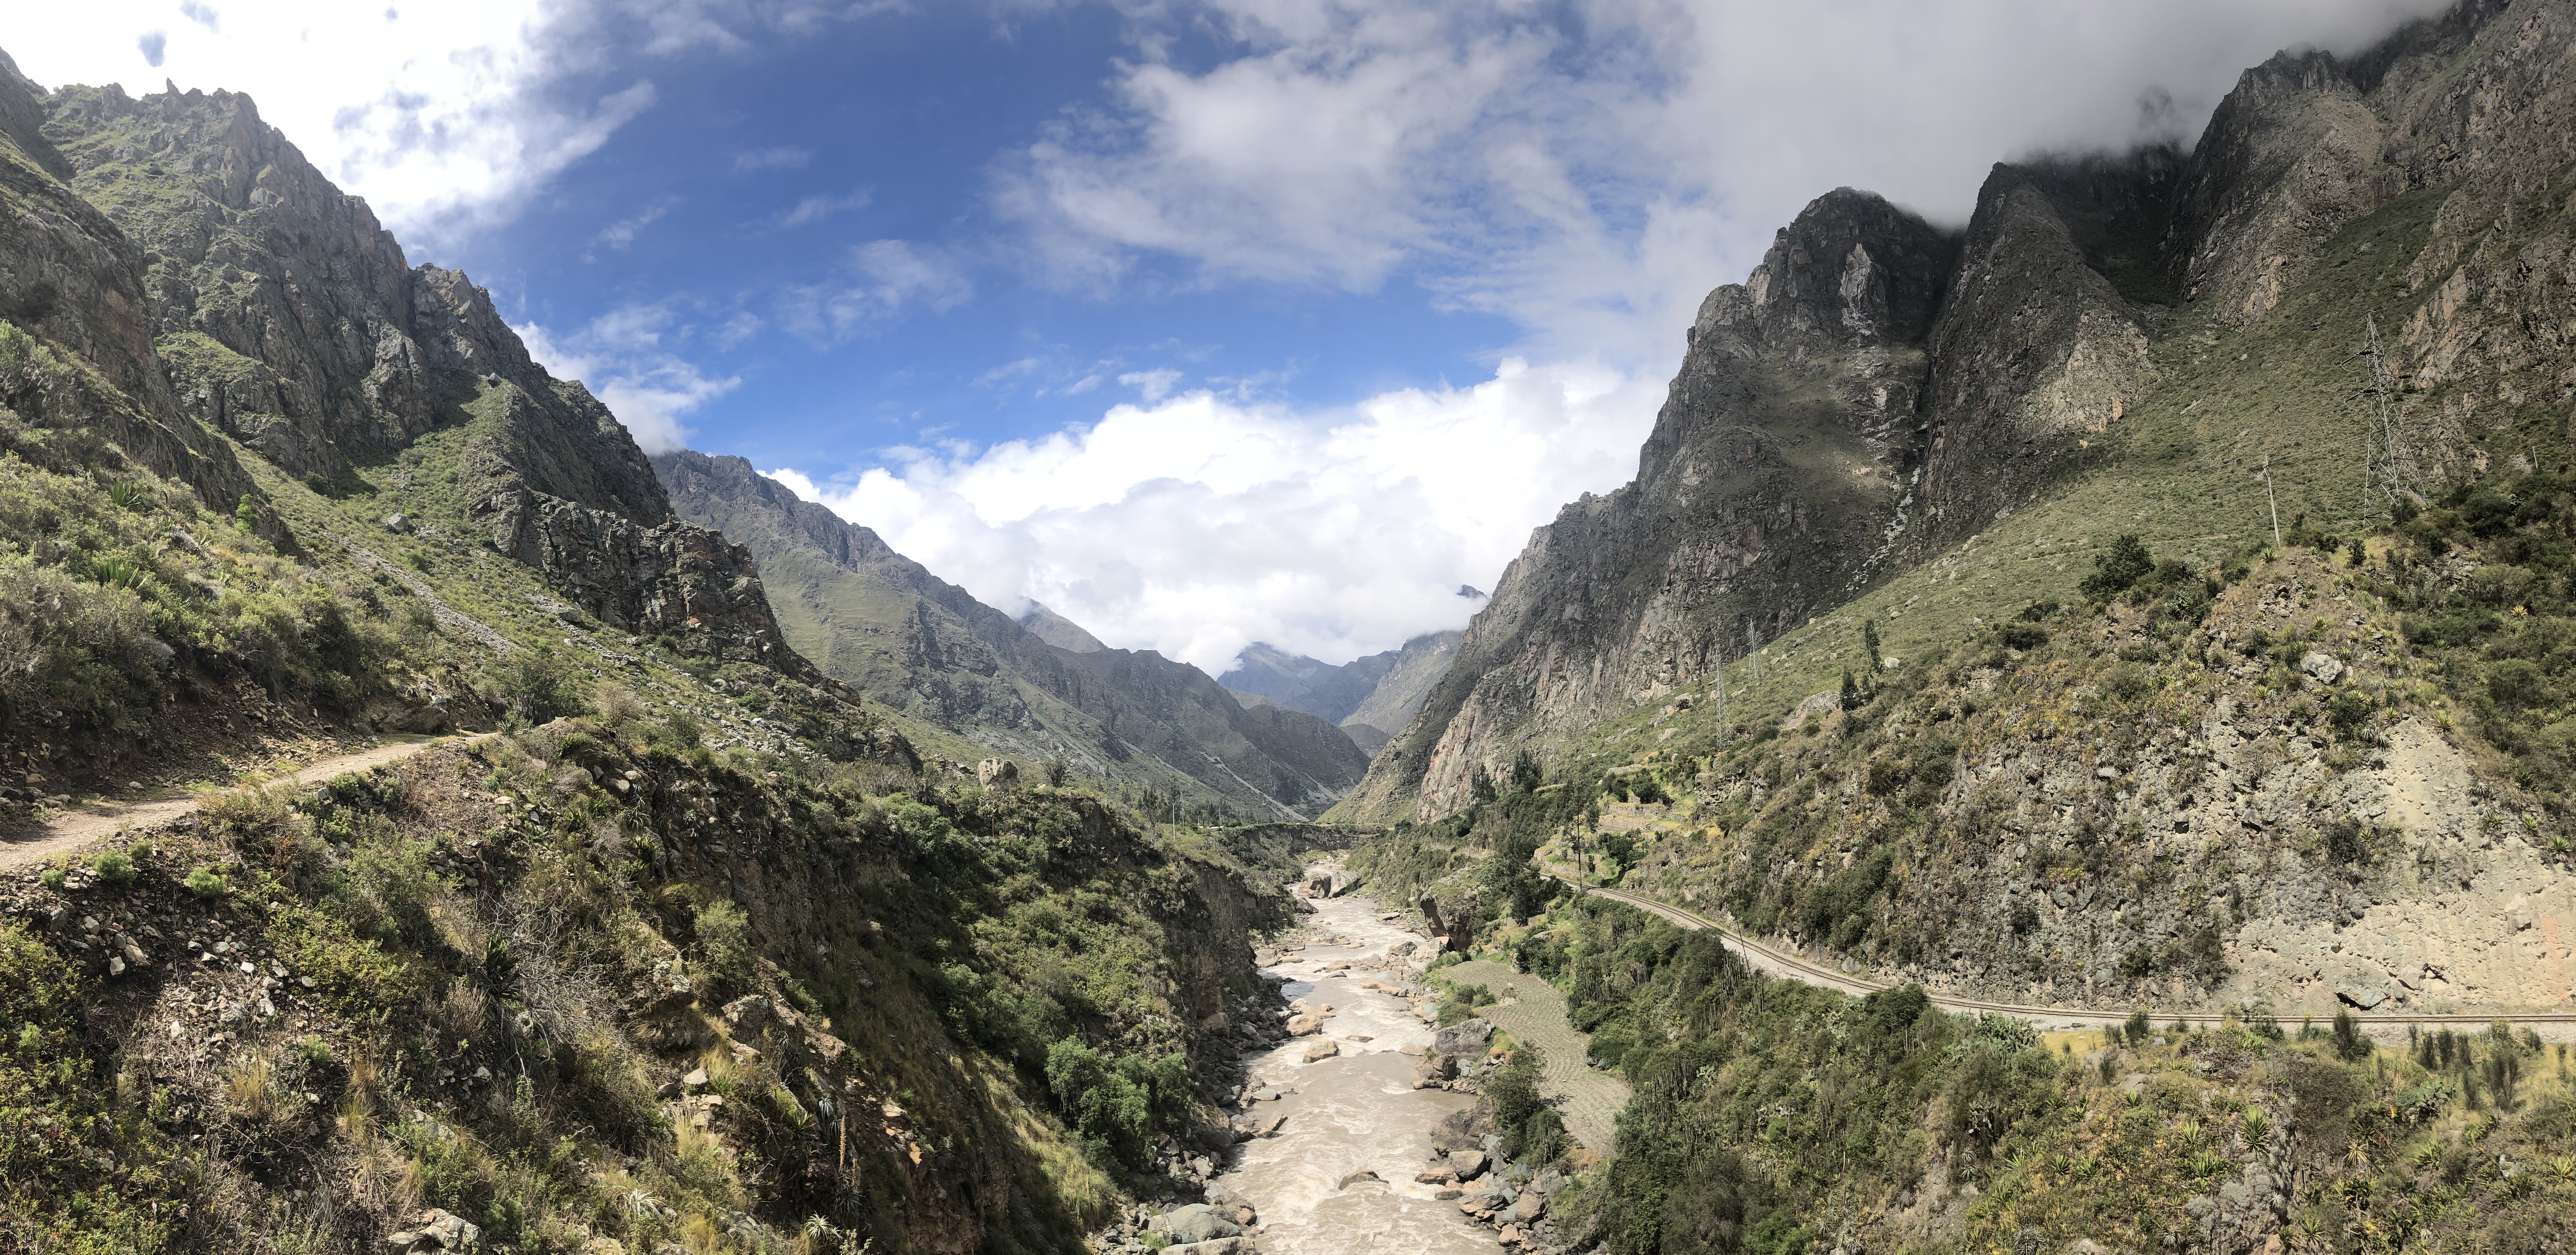 20 Pictures That Will Convince You To Hike the Inca Trail